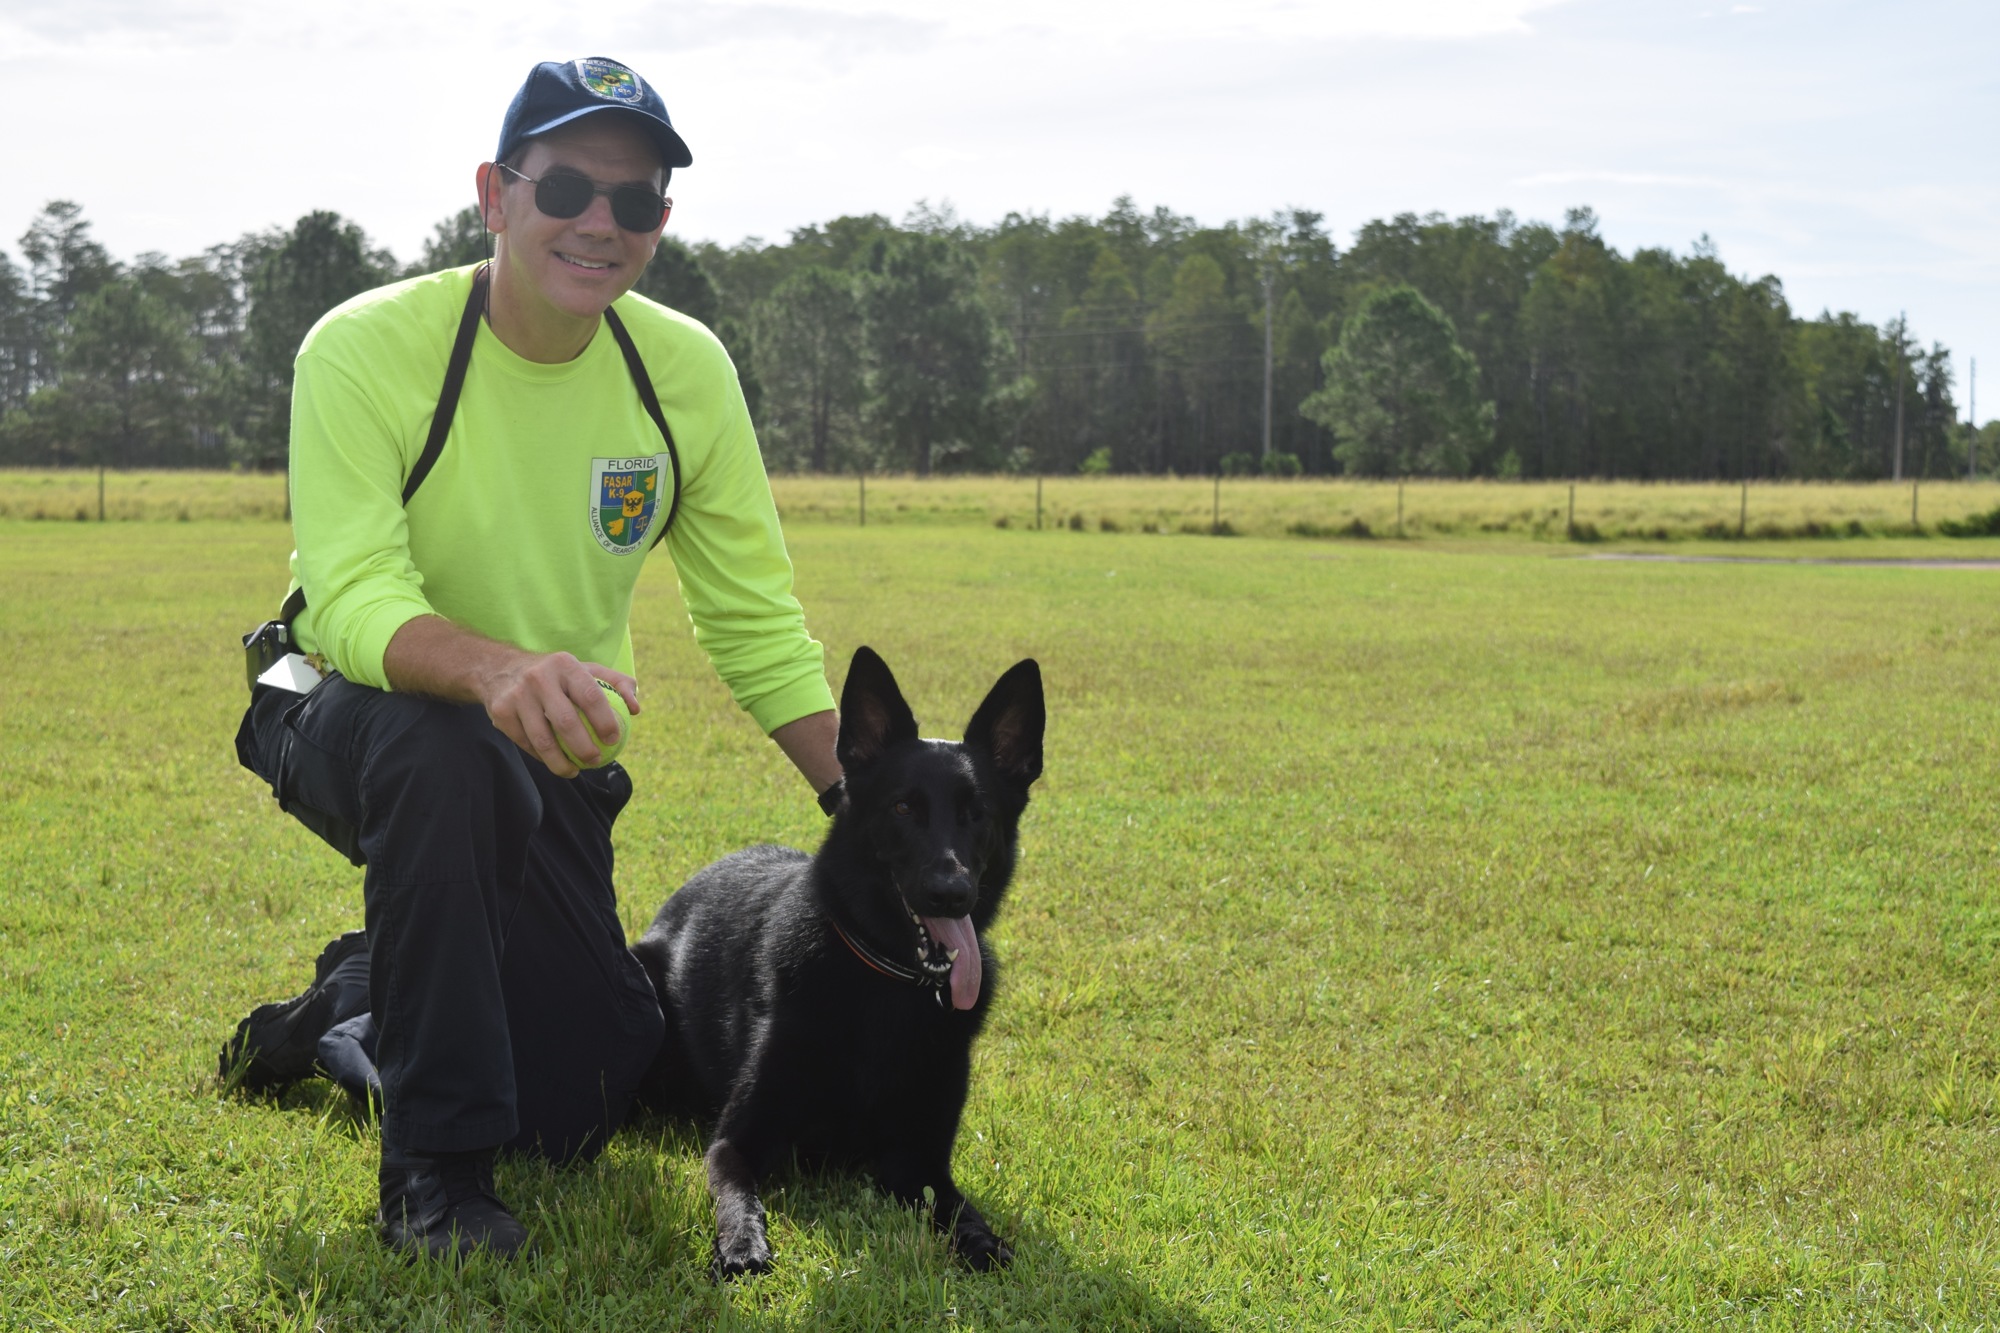 Matt FitzGibbon and his certified human-remains-detection dog, Vesper, work with the Florida Alliance of Search and Rescue K-9.